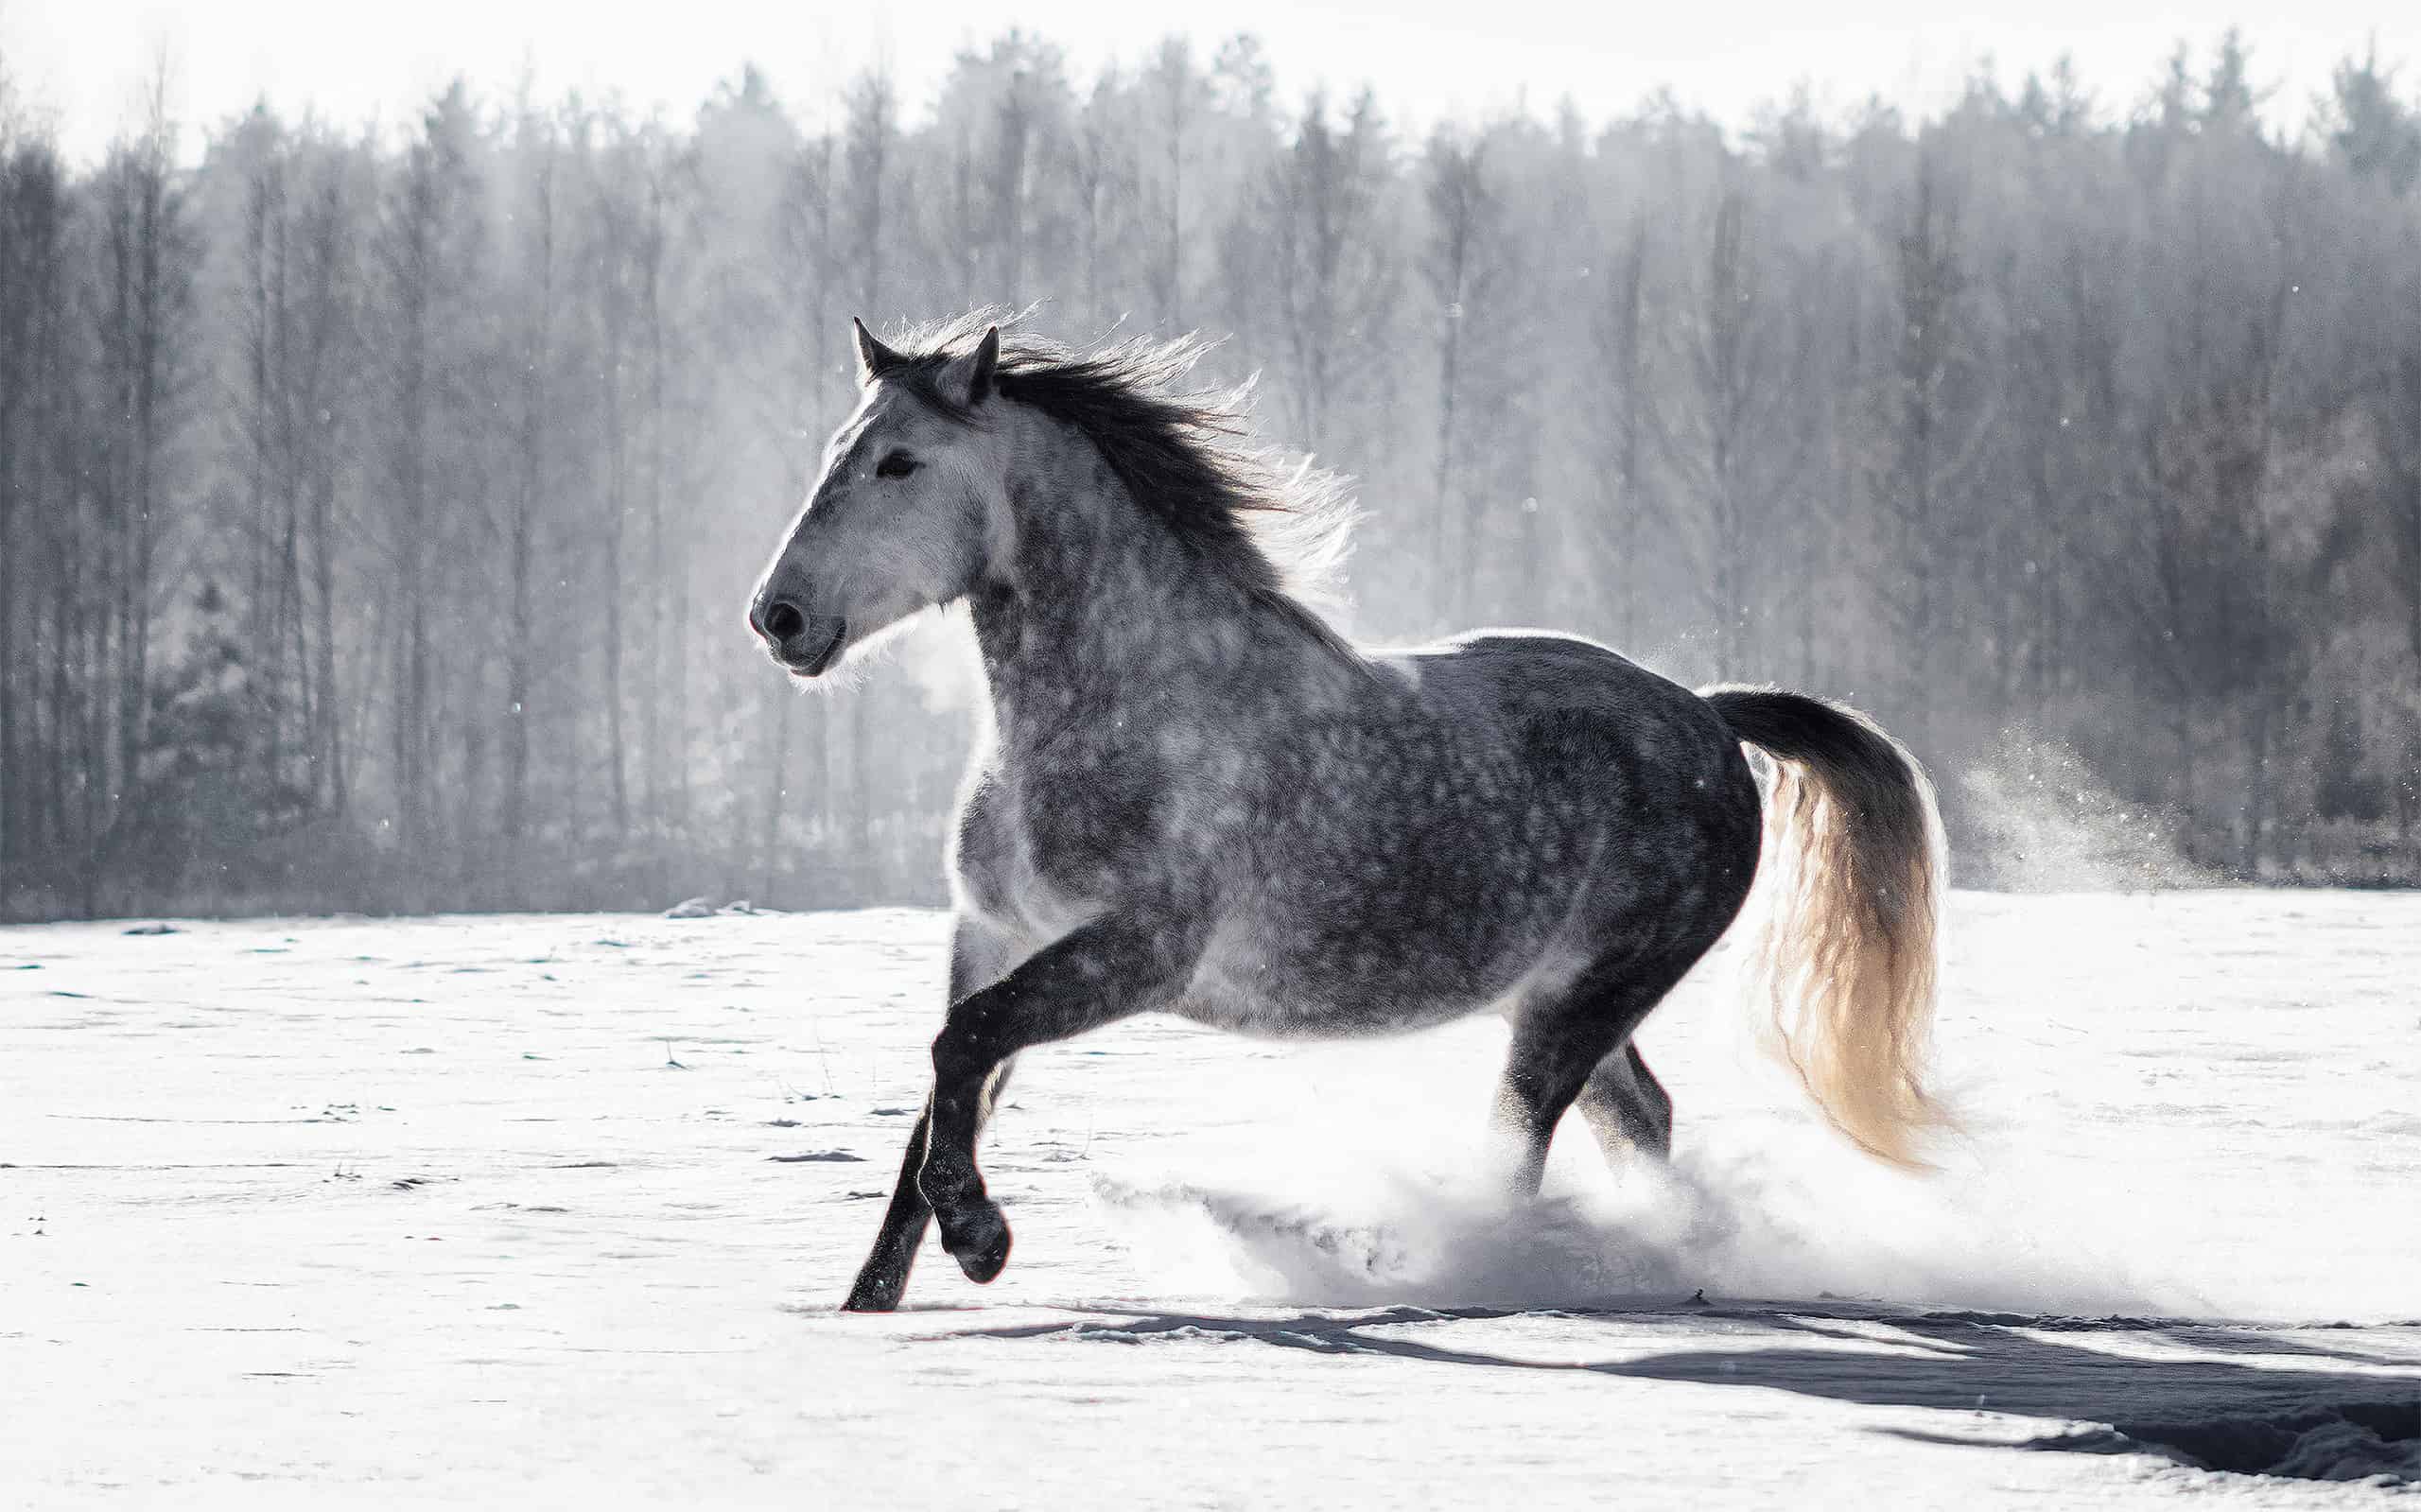 Dappled grey andalusian (PRE) horse galloping in the snow in winter.